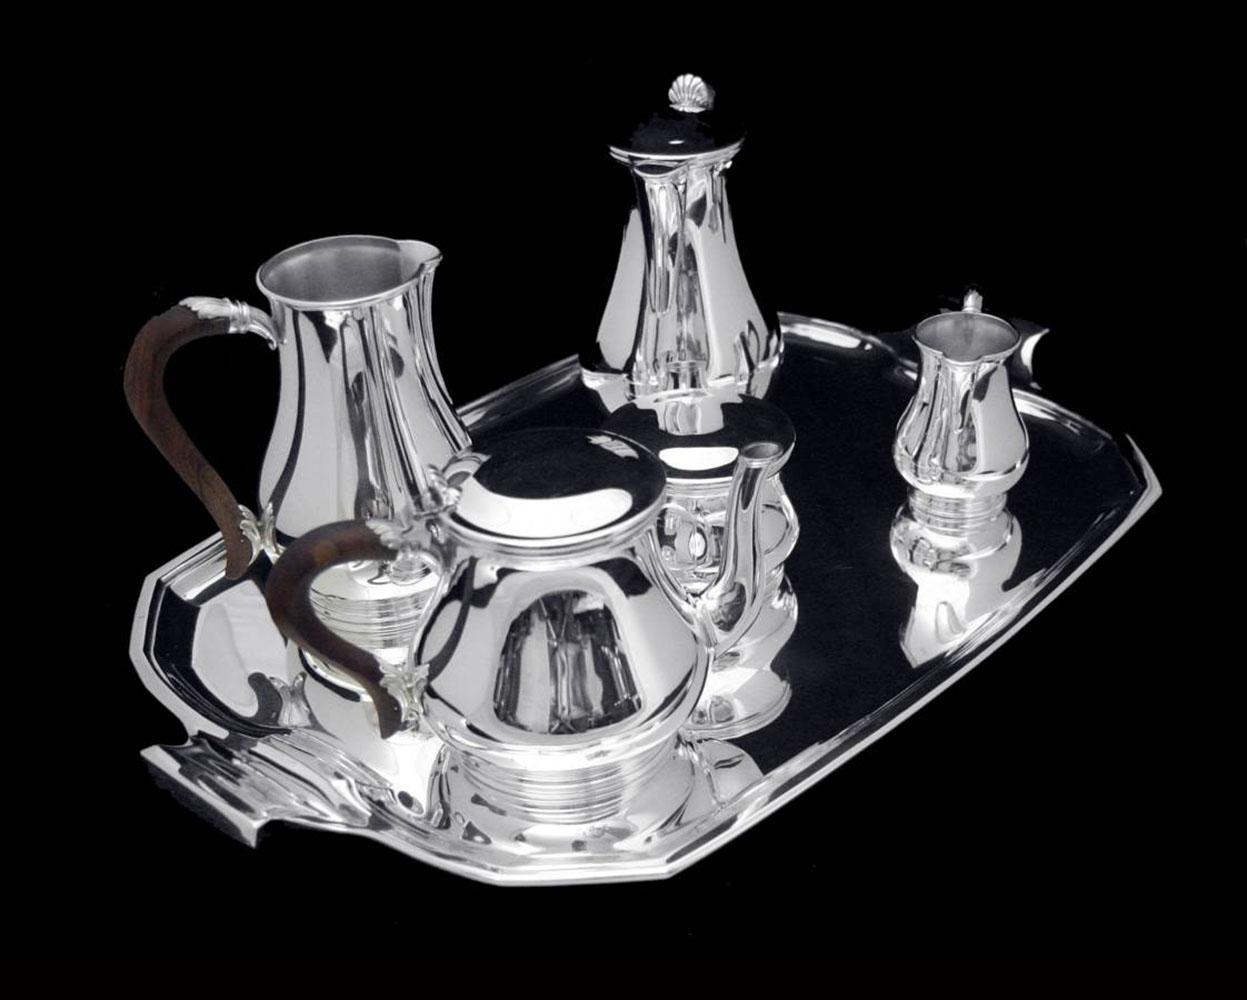 Direct from Paris, A Superb 6pc. 20th Century Original French Art Deco 950 Sterling Silver Tea Set by the World's Premier French Silversmith 